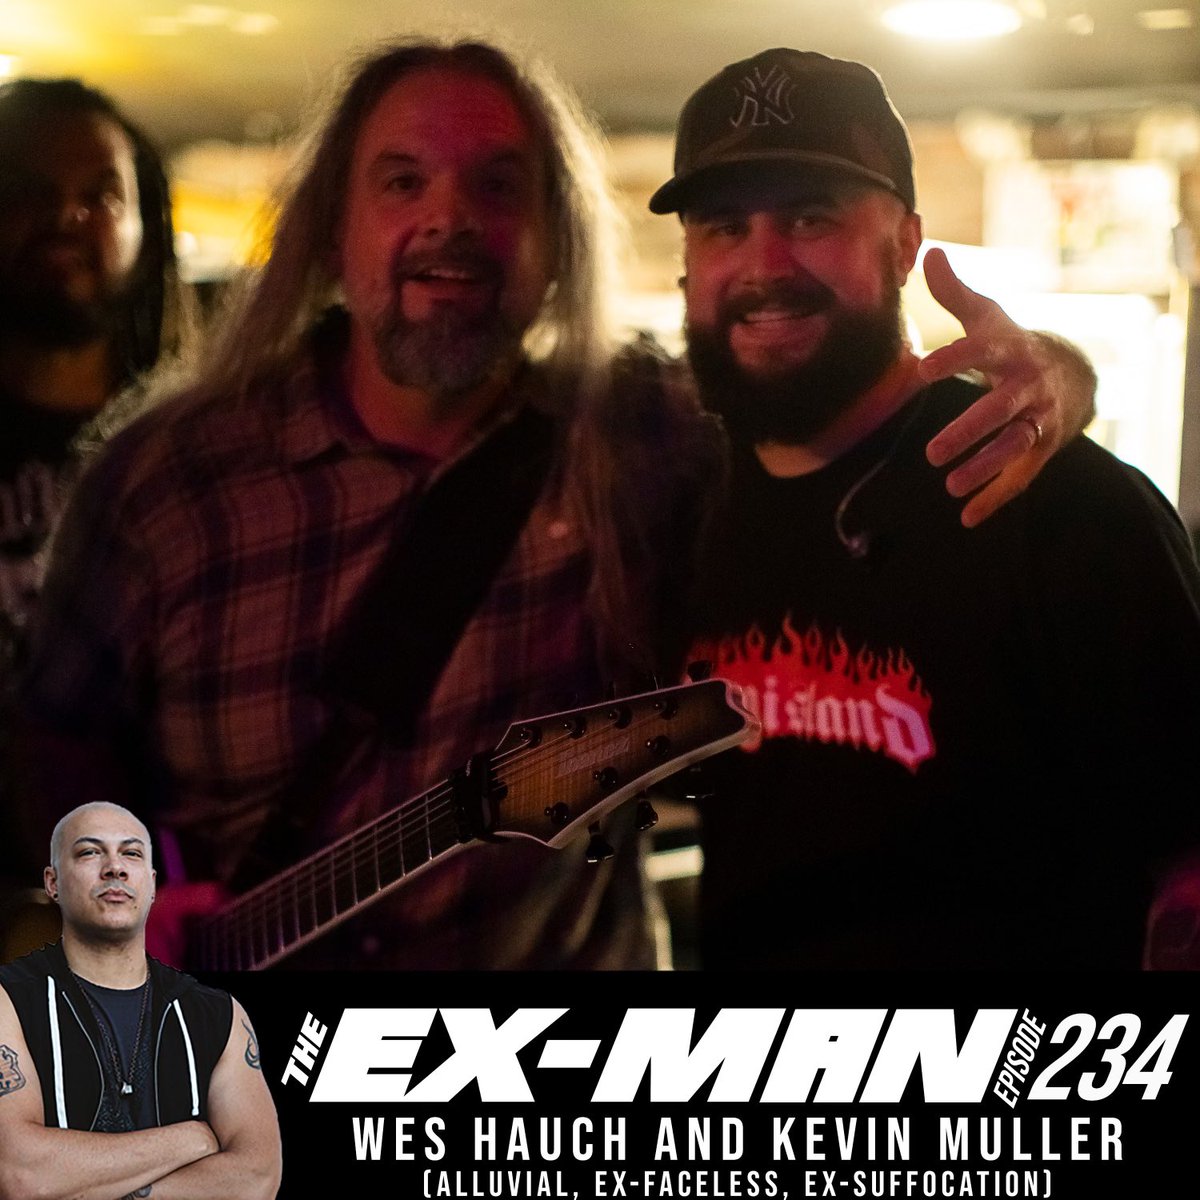 .@kevmullerlive and myself had a crispy one with @DocCoyle for the ExMan Pod. We talk about the new @AlluvialMetal EP, Long Island, and Metallica. Listen here - soundtalentmedia.com/show/the-ex-ma…